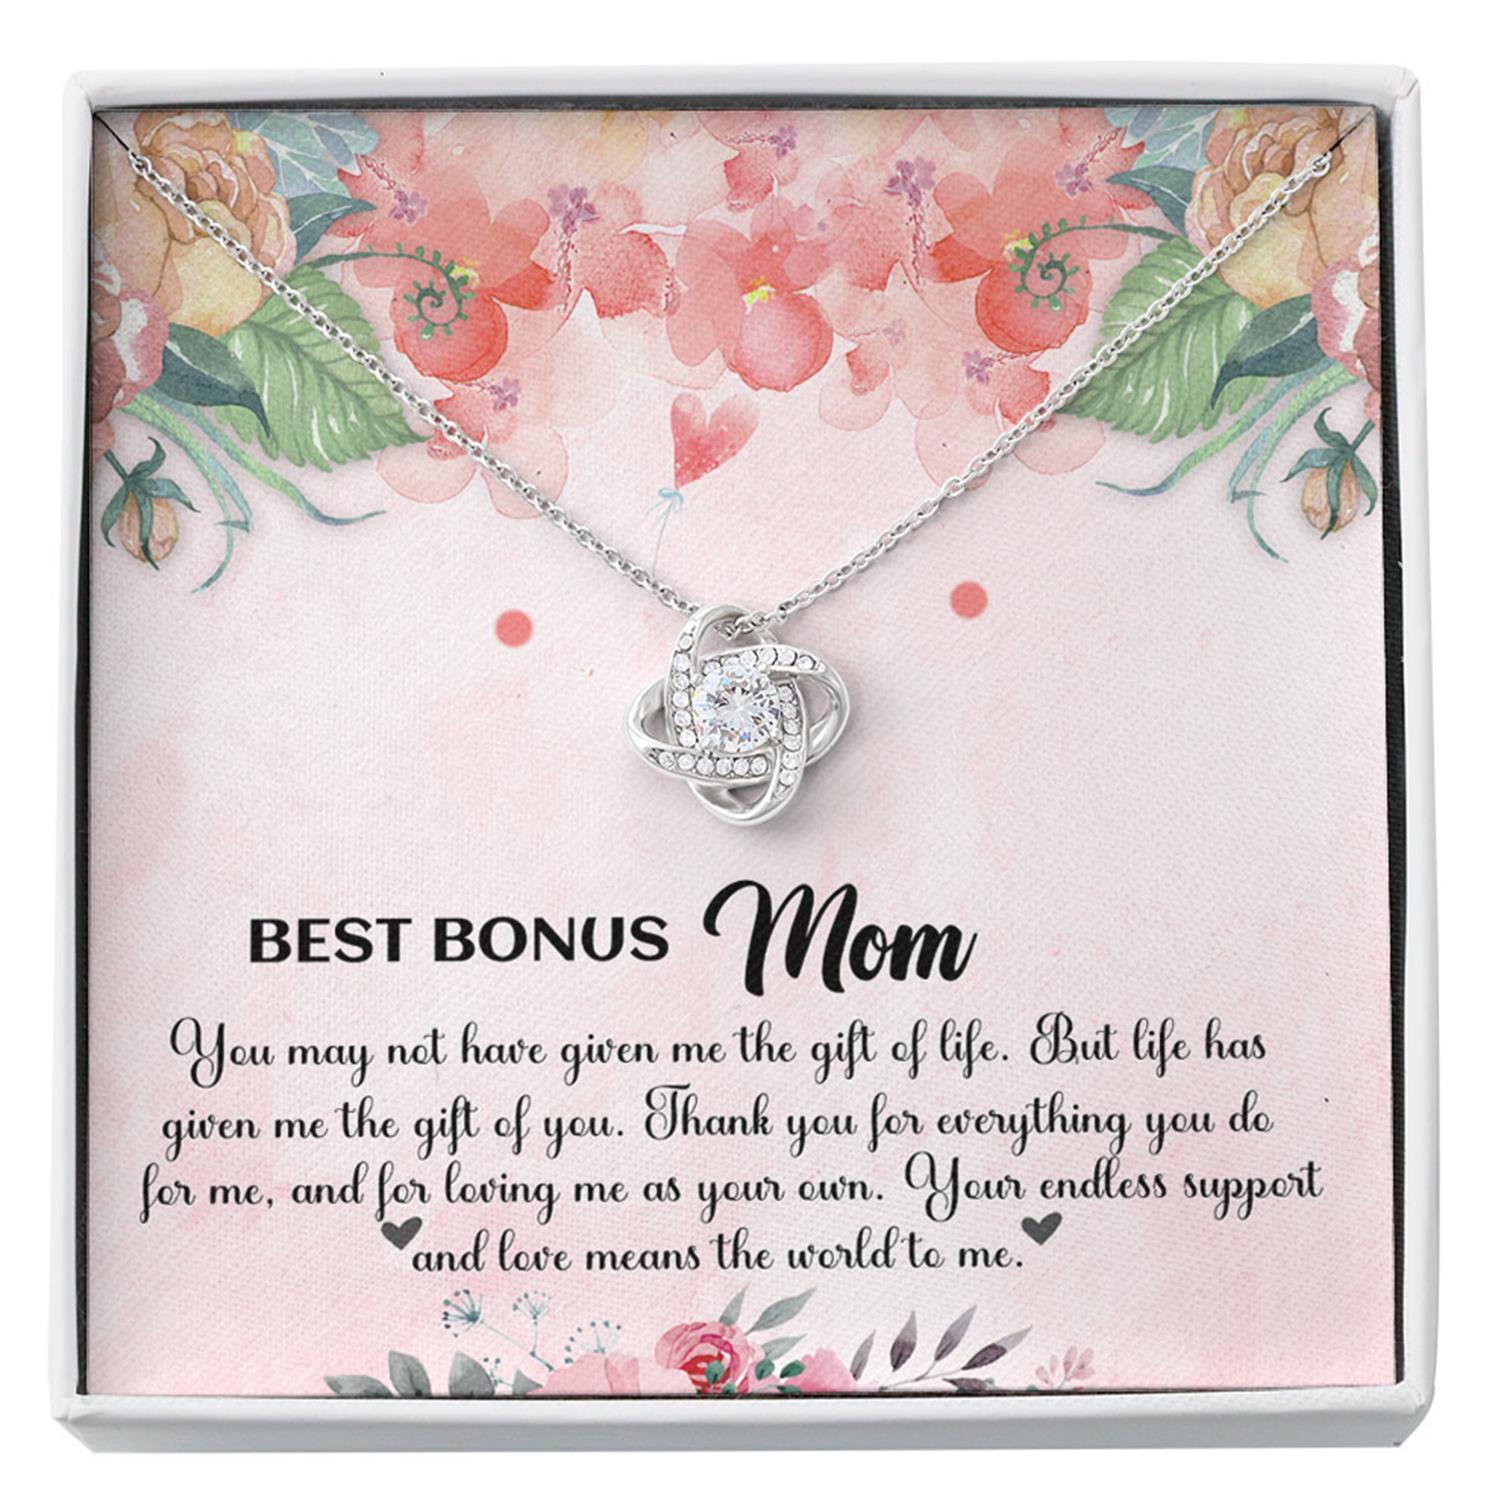 Mom Necklace, Mother Daughter Son Necklace, Presents For Mom Gifts, Best Bonus World Custom Necklace